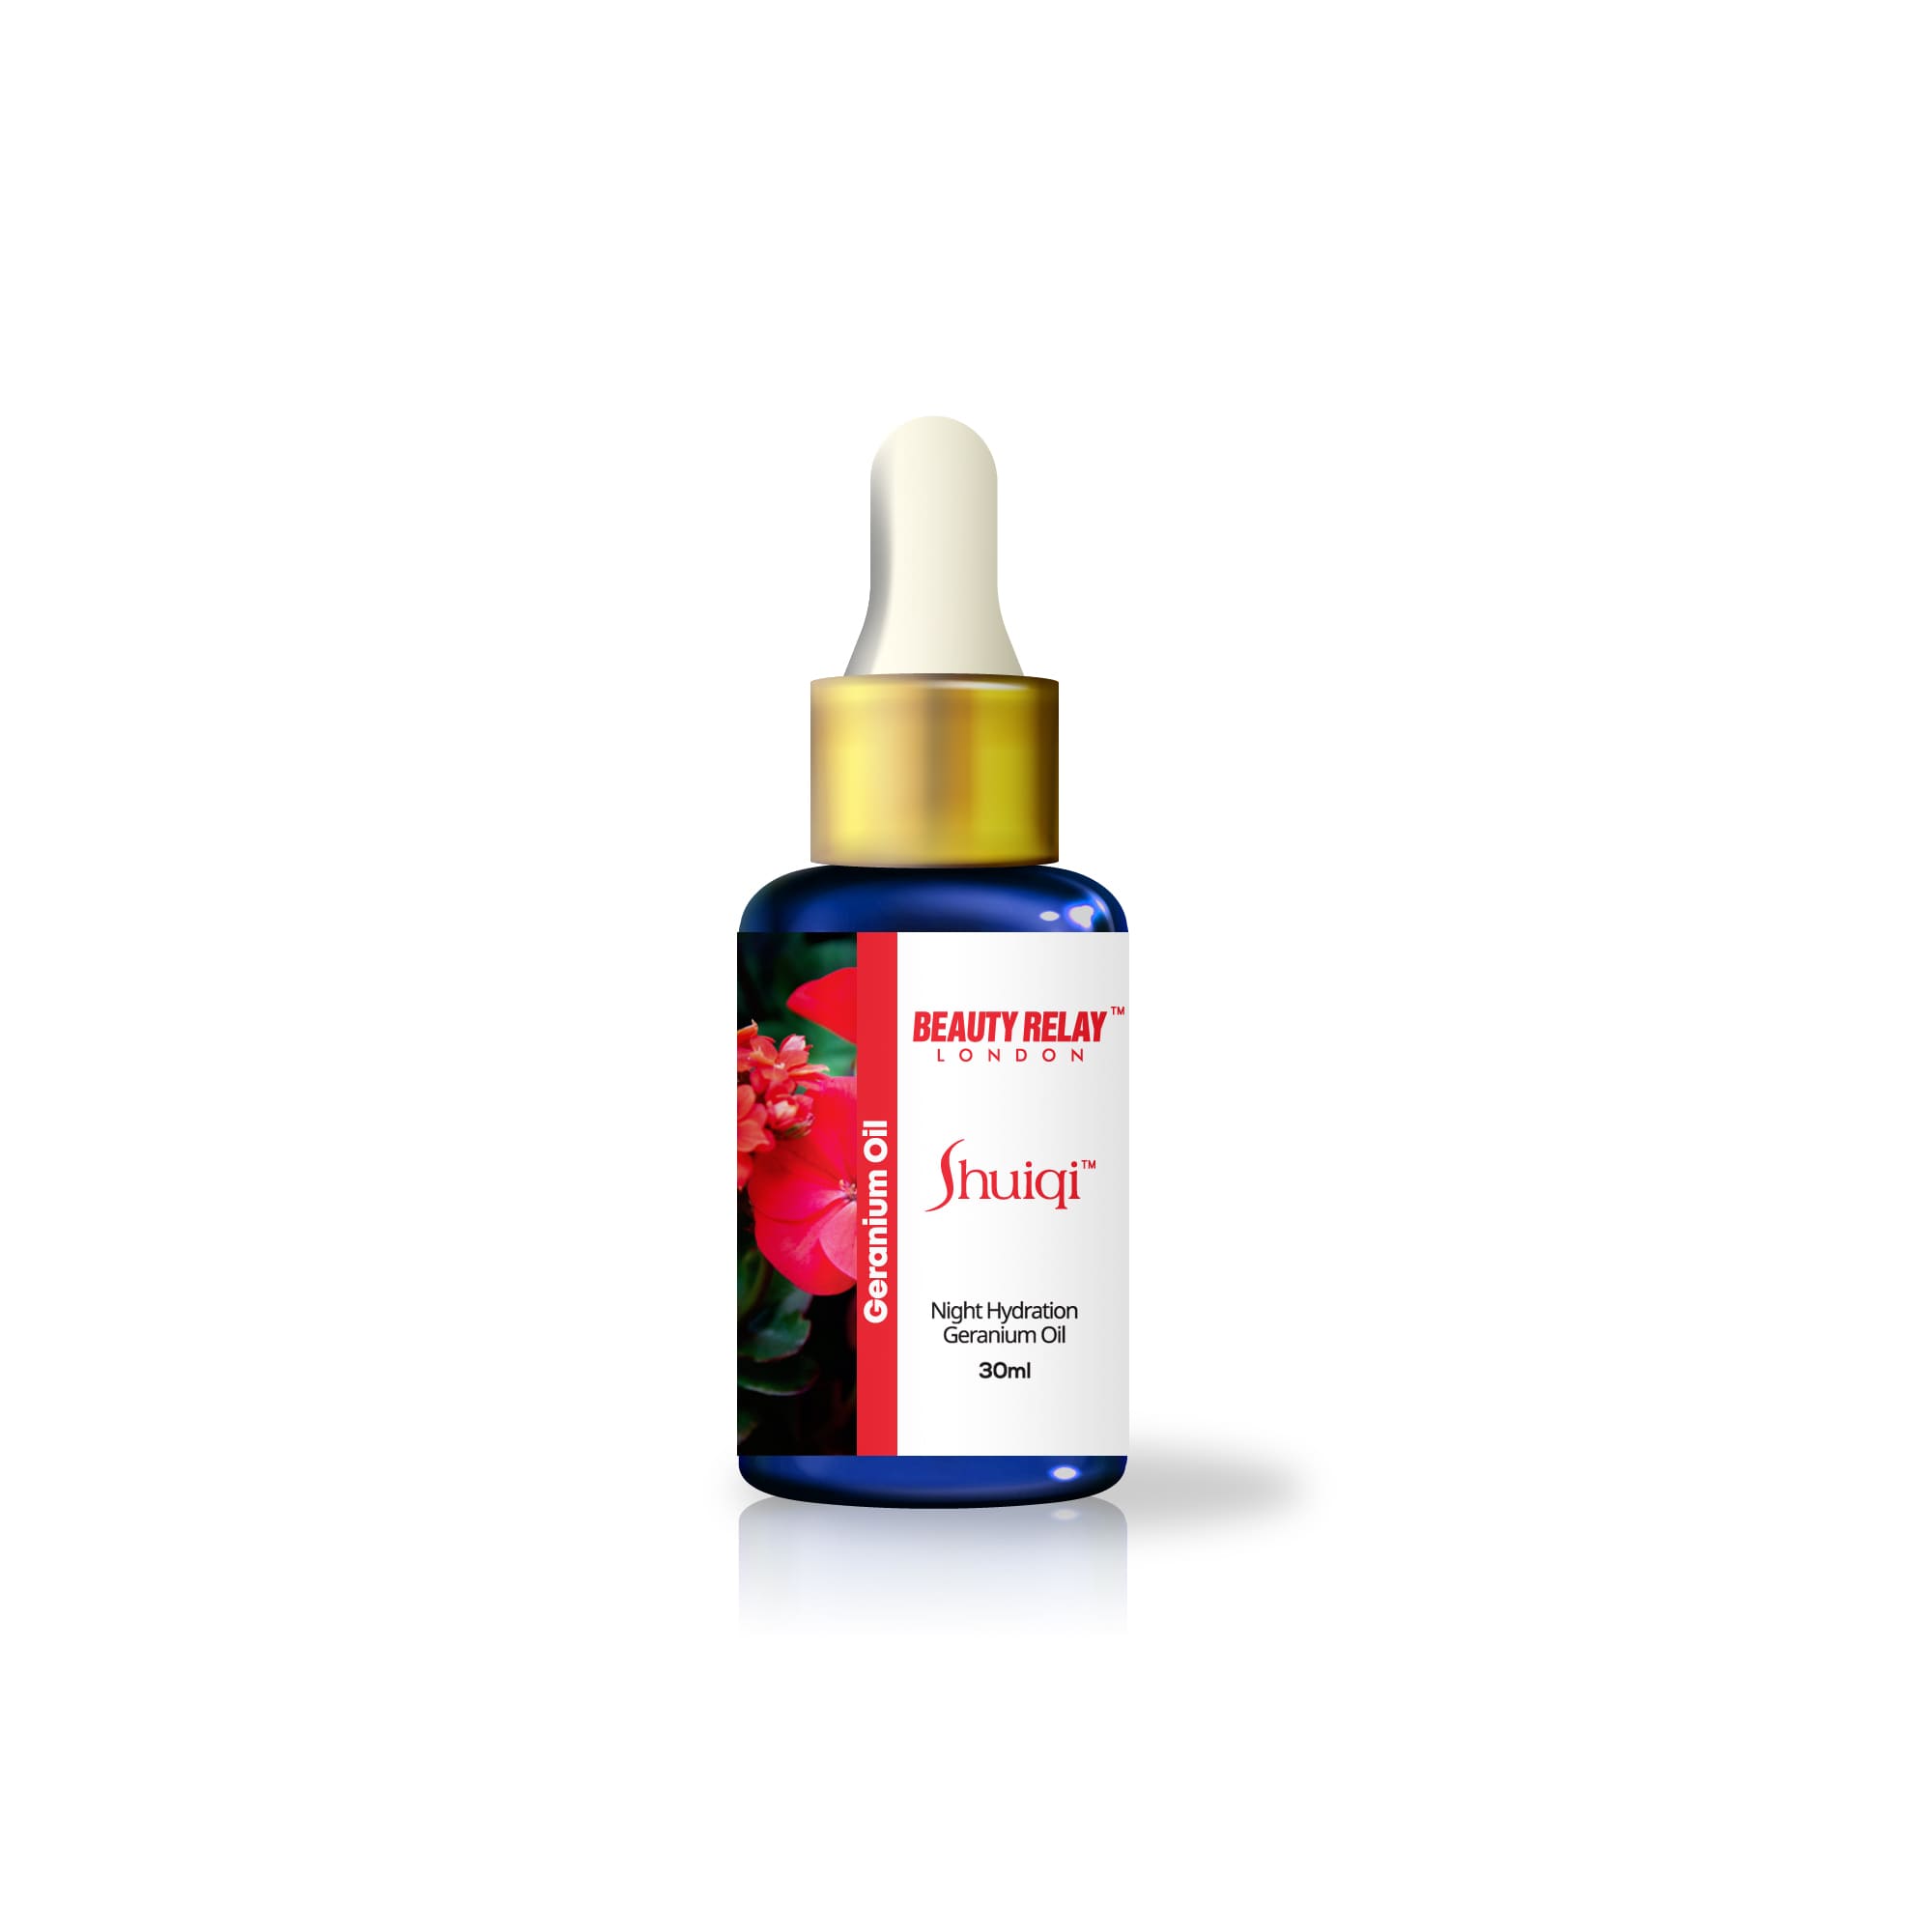 Night Hydration Face Oil With Geranium Oil